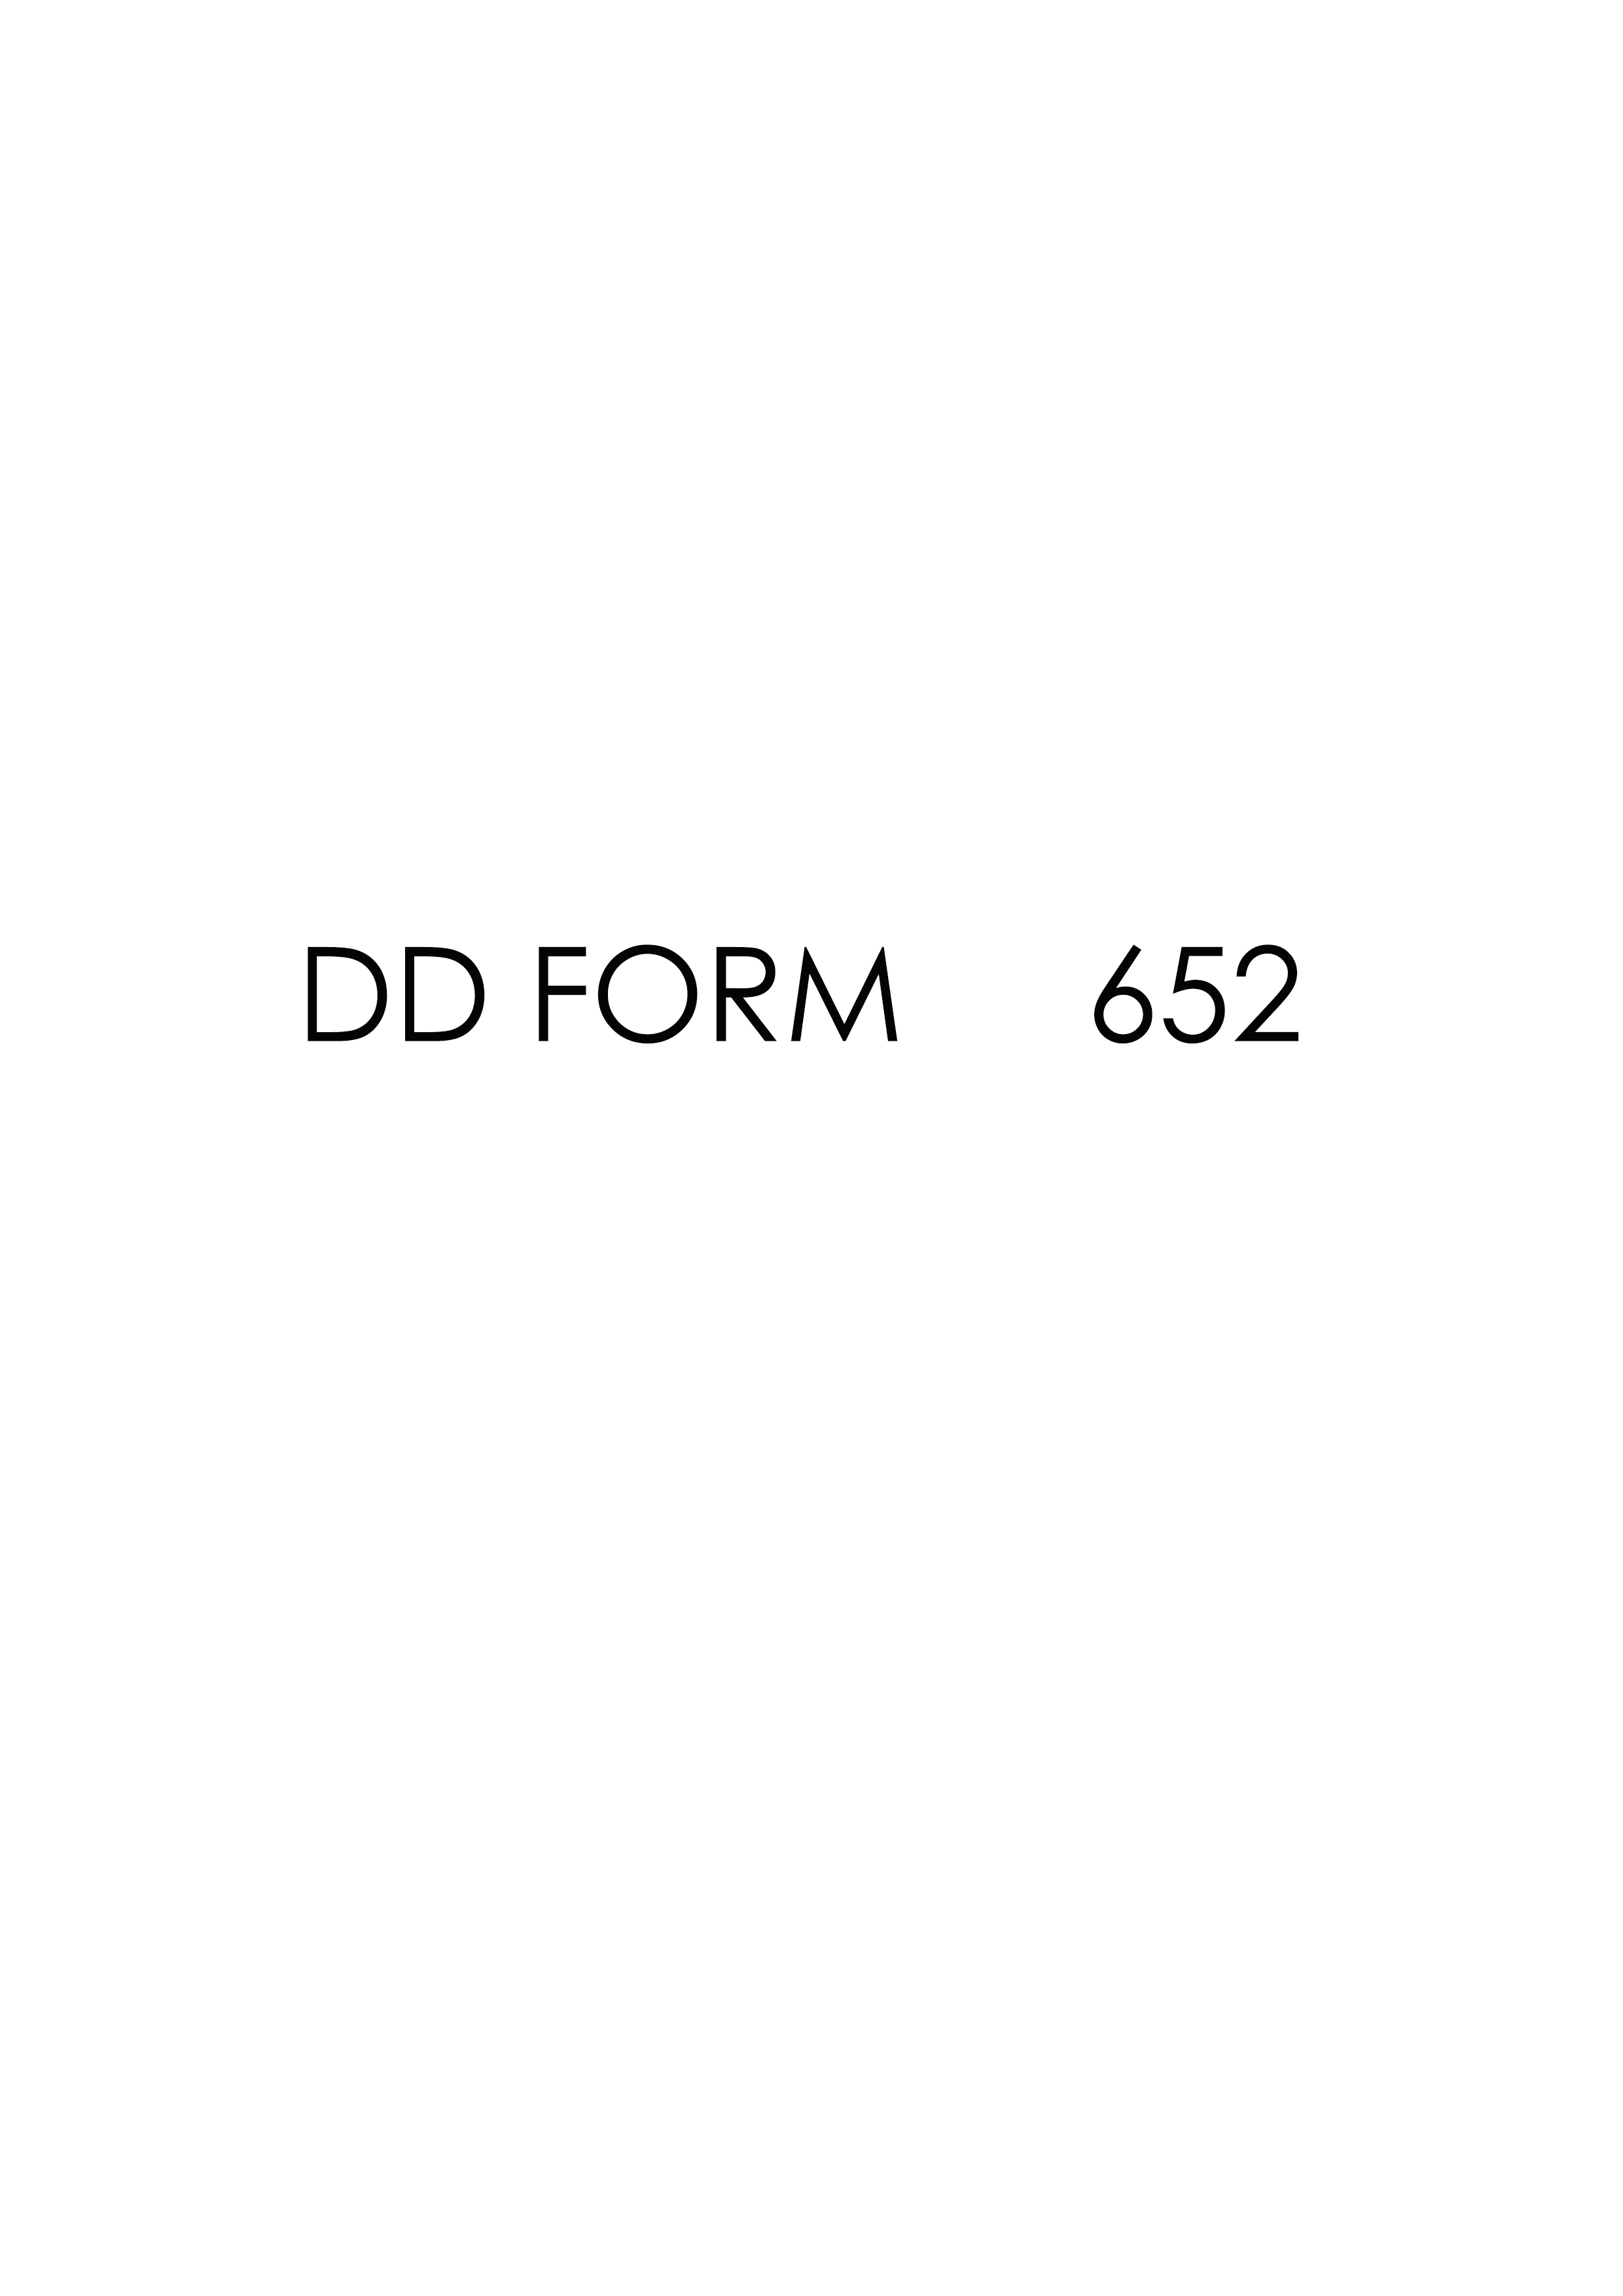 Download Fillable dd Form 652